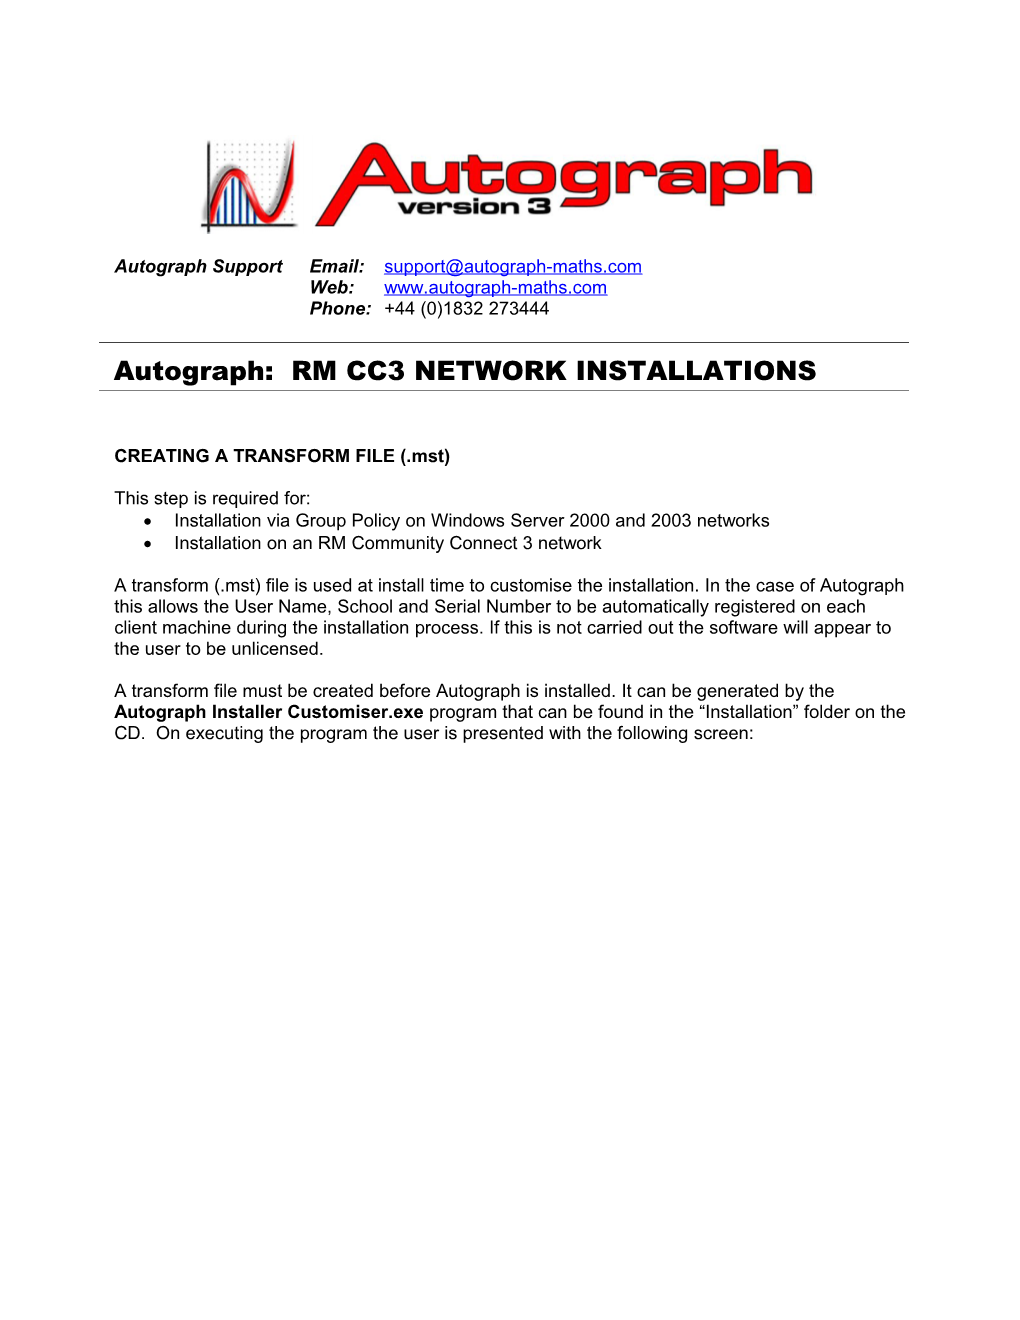 Installing Autograph on an RM CC3 Network